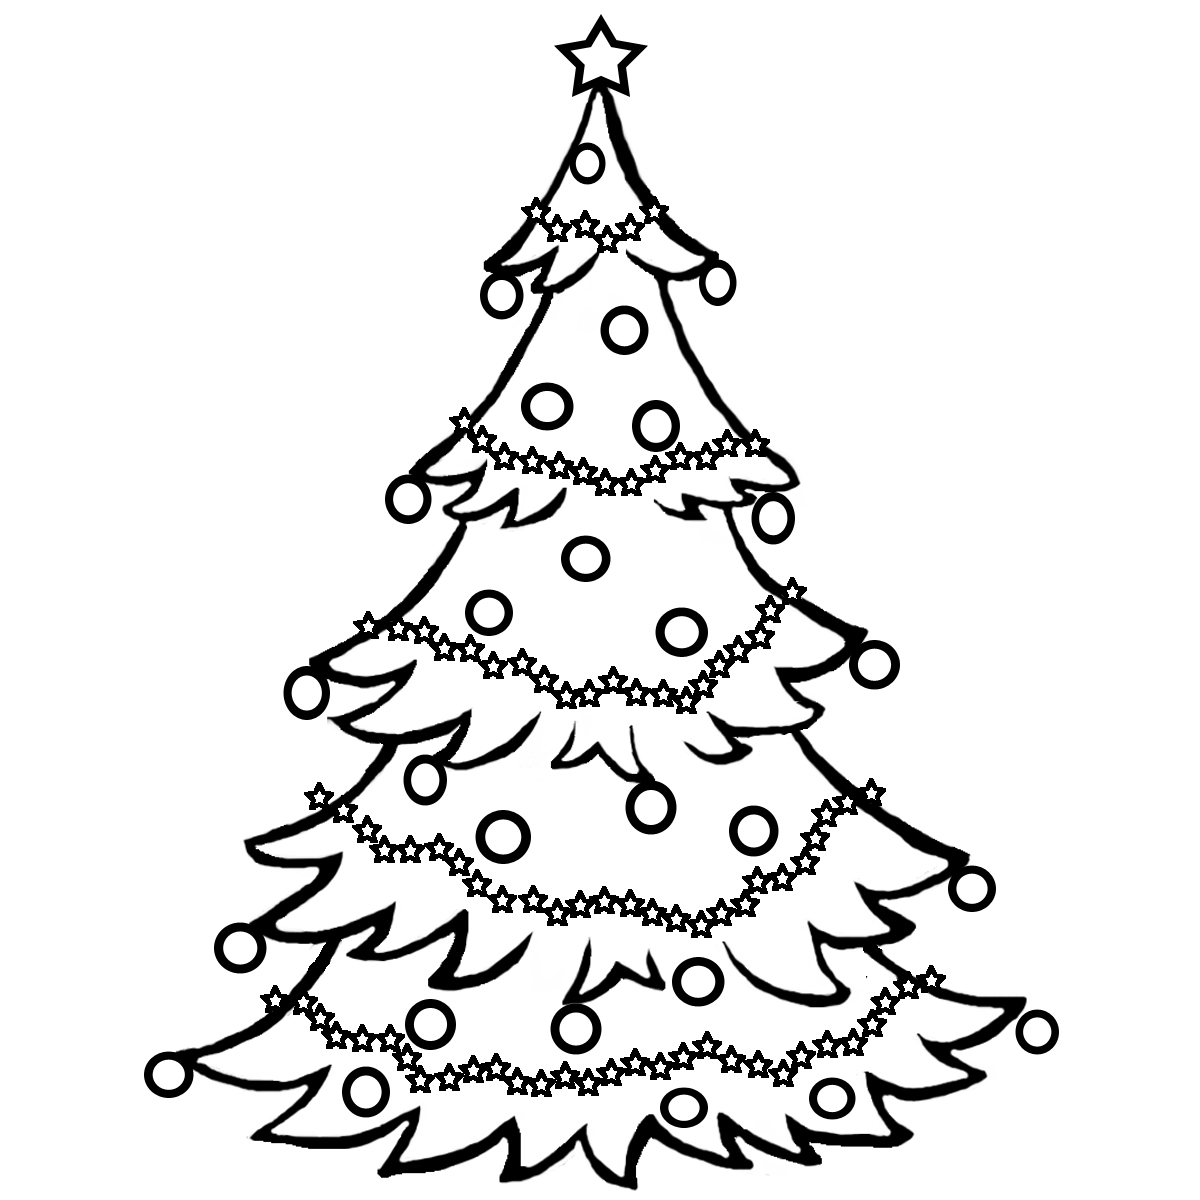 Christmas Tree Black And White Clipart Big - ClipArt Best